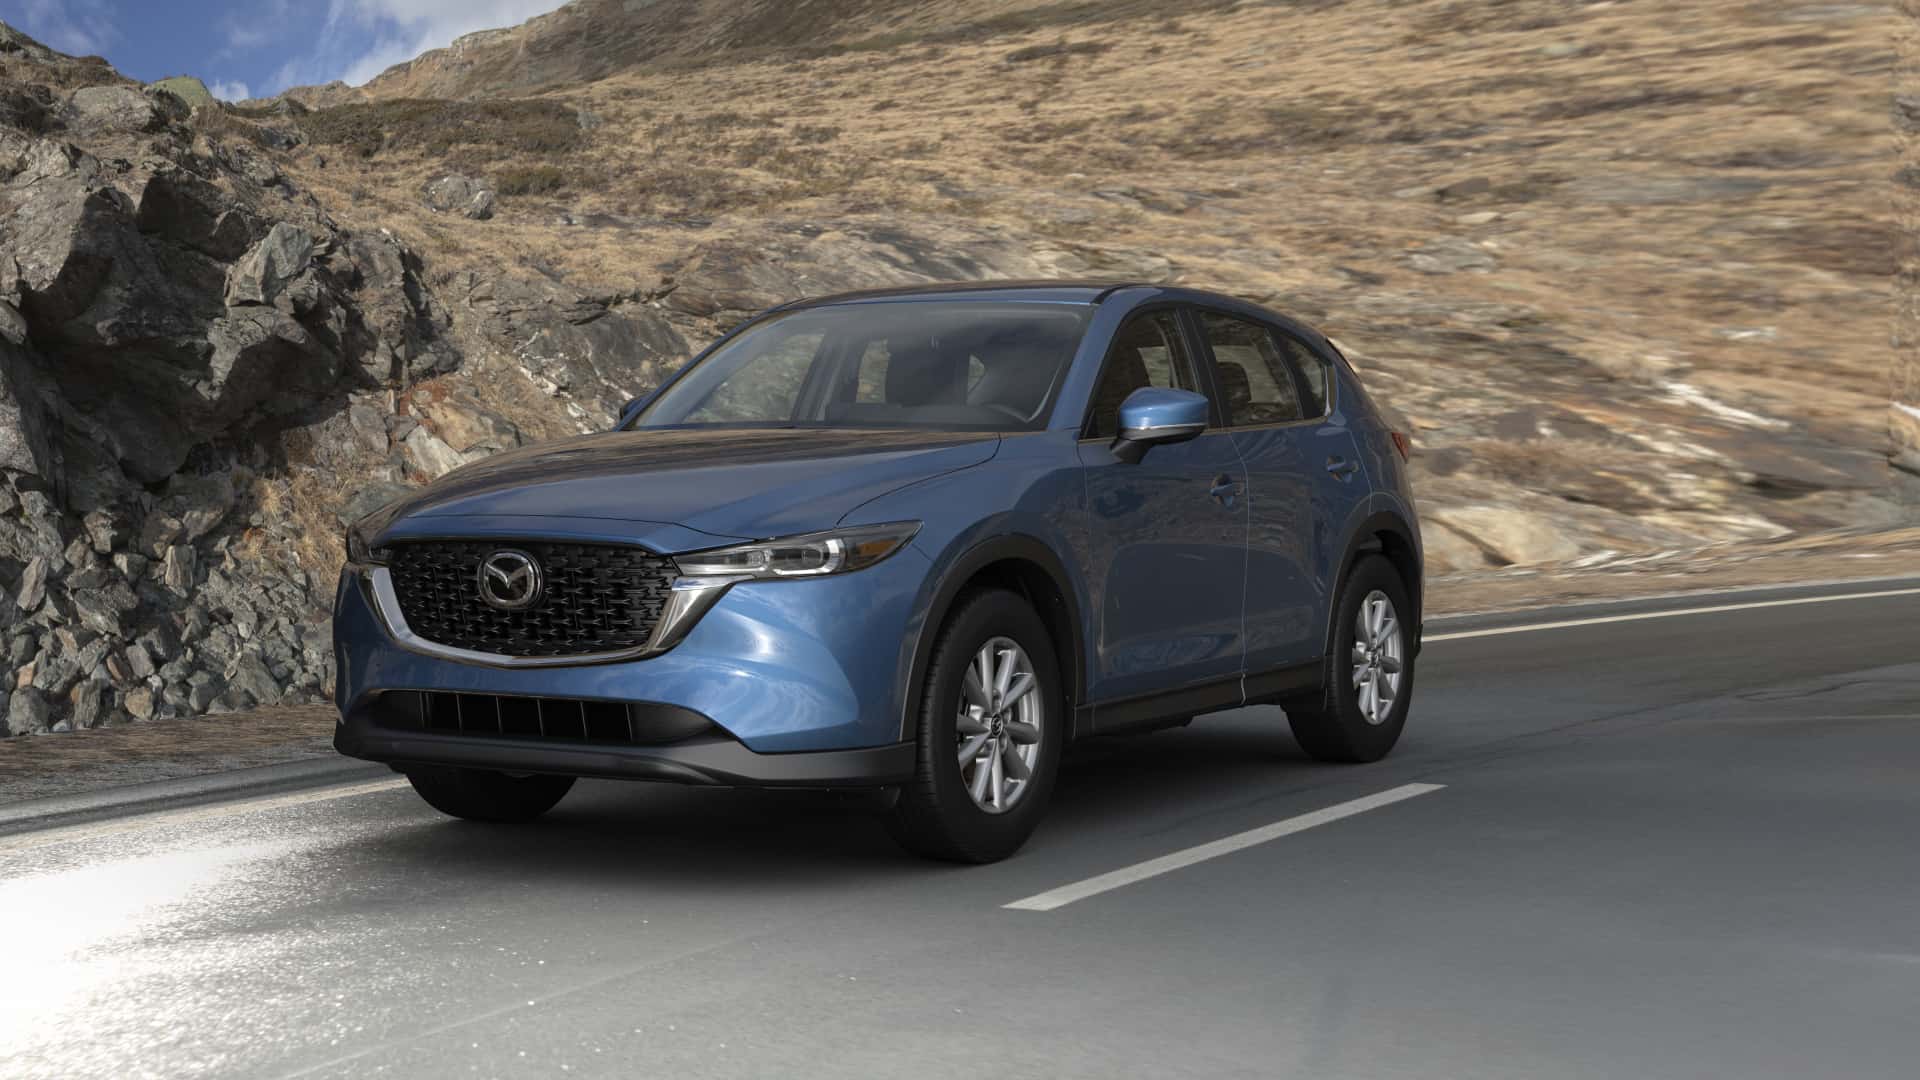 2023 Mazda CX-5 2.5 S Deep Crystal Blue Mica | Neil Huffman Mazda in Louisville KY